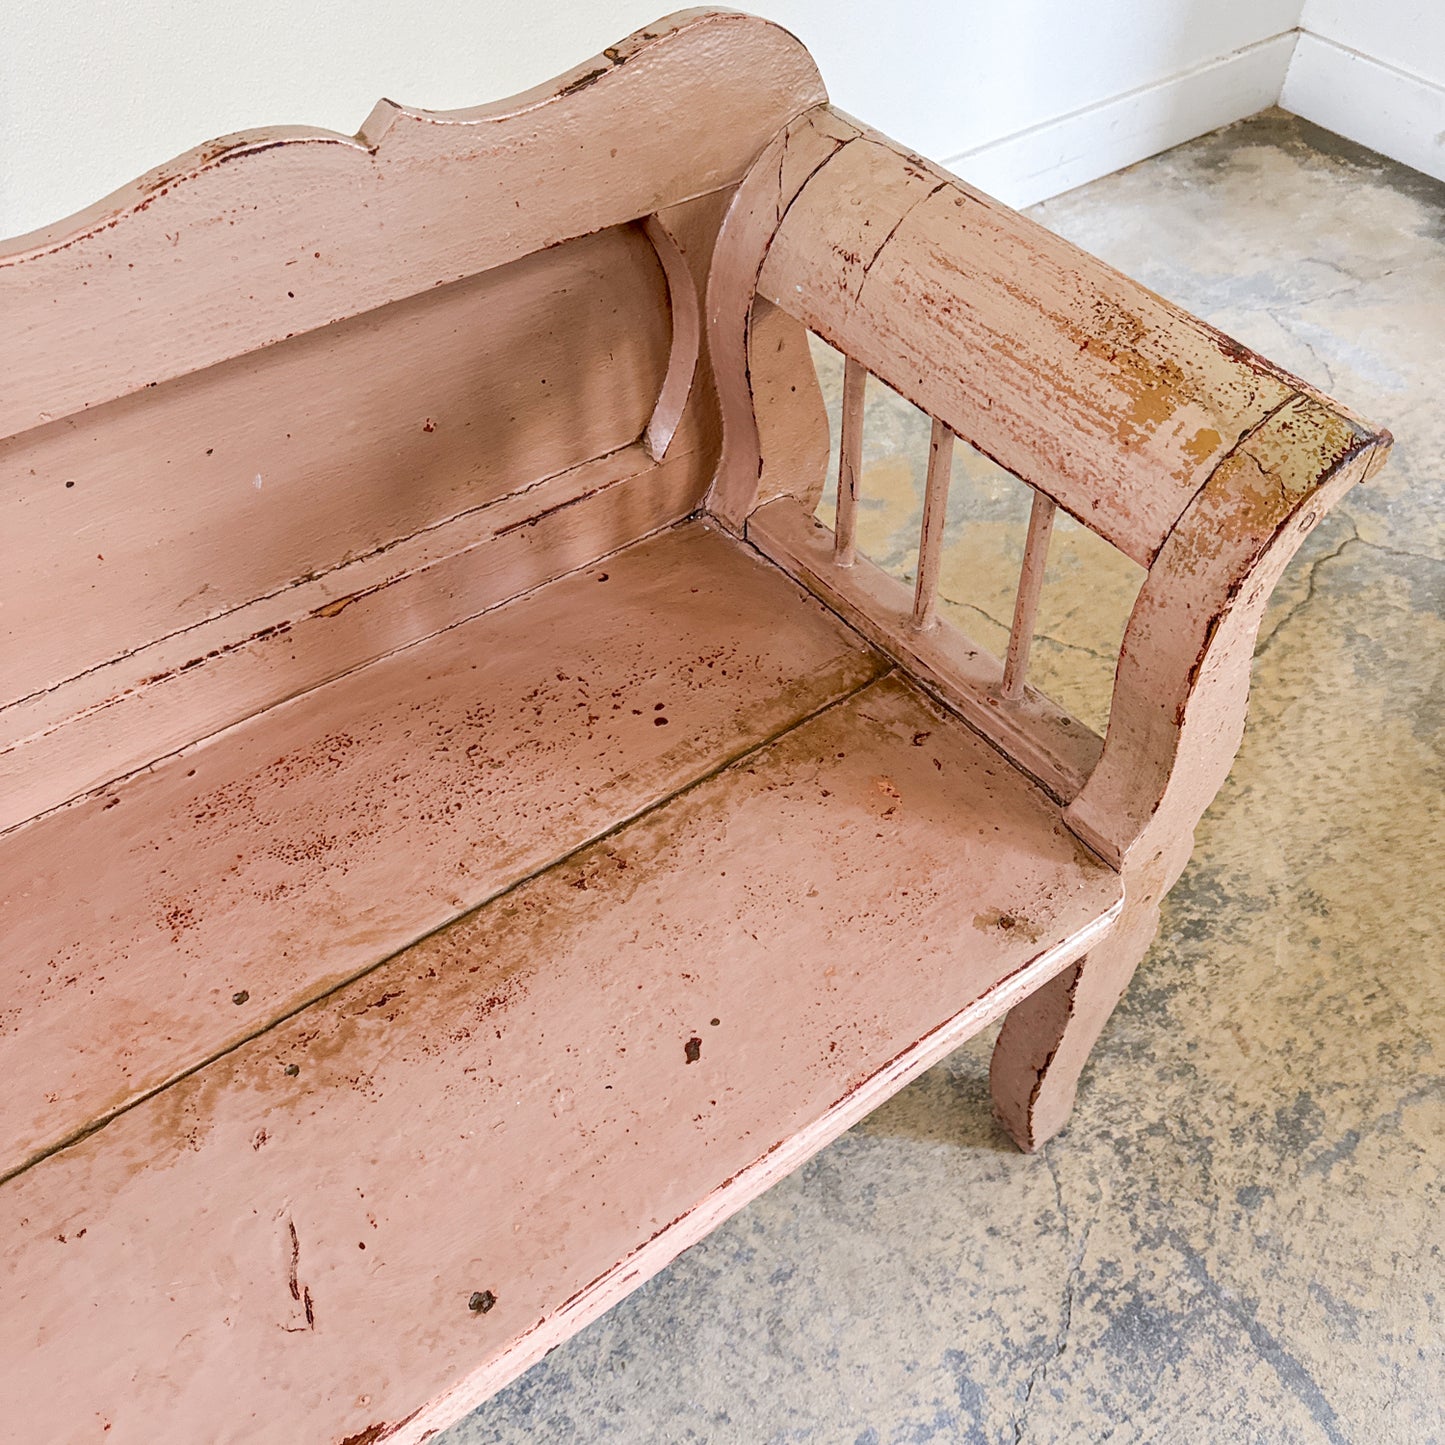 Antique Blush Painted Bench